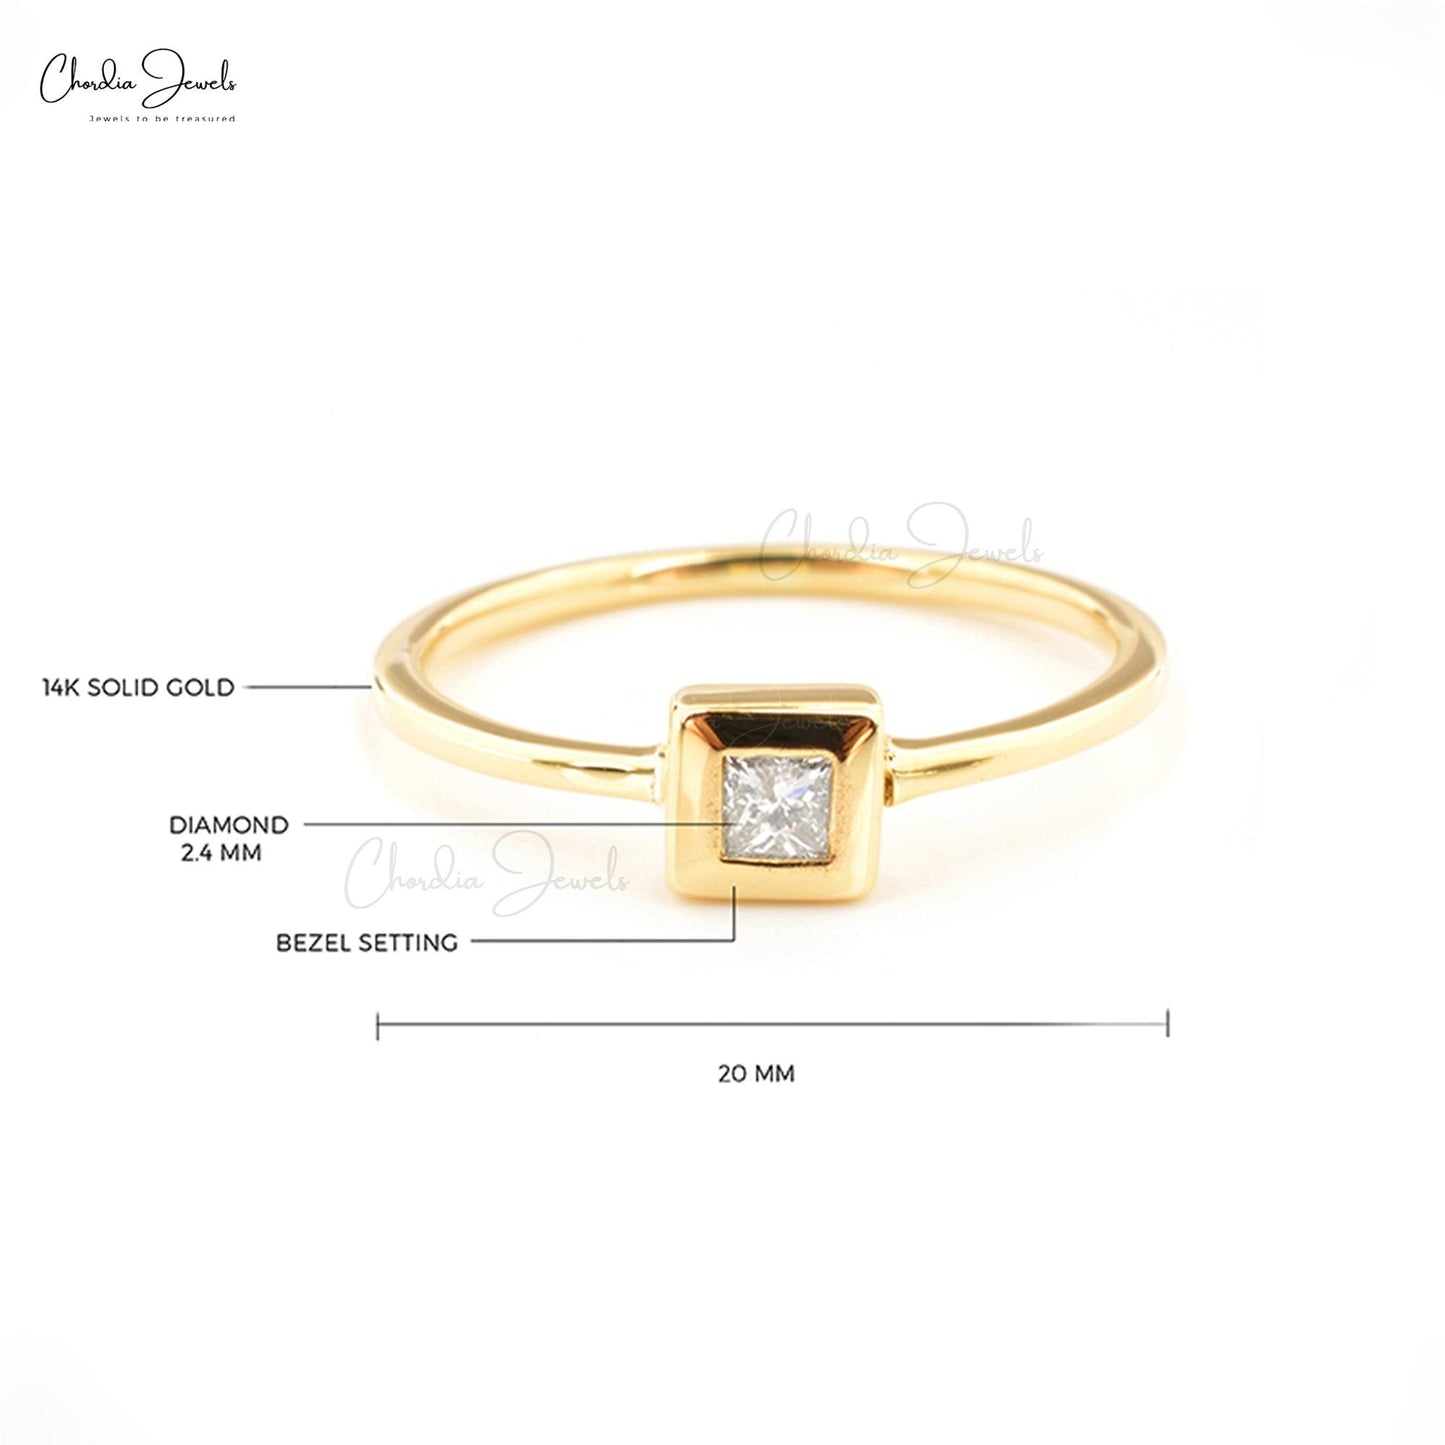 0.07 Carat Natural White Diamond Ring, 14k Solid Yellow Gold 2.4mm Square Princess Cut Bezel Set Ring, Engagement Ring Gift for Her - Chordia Jewels